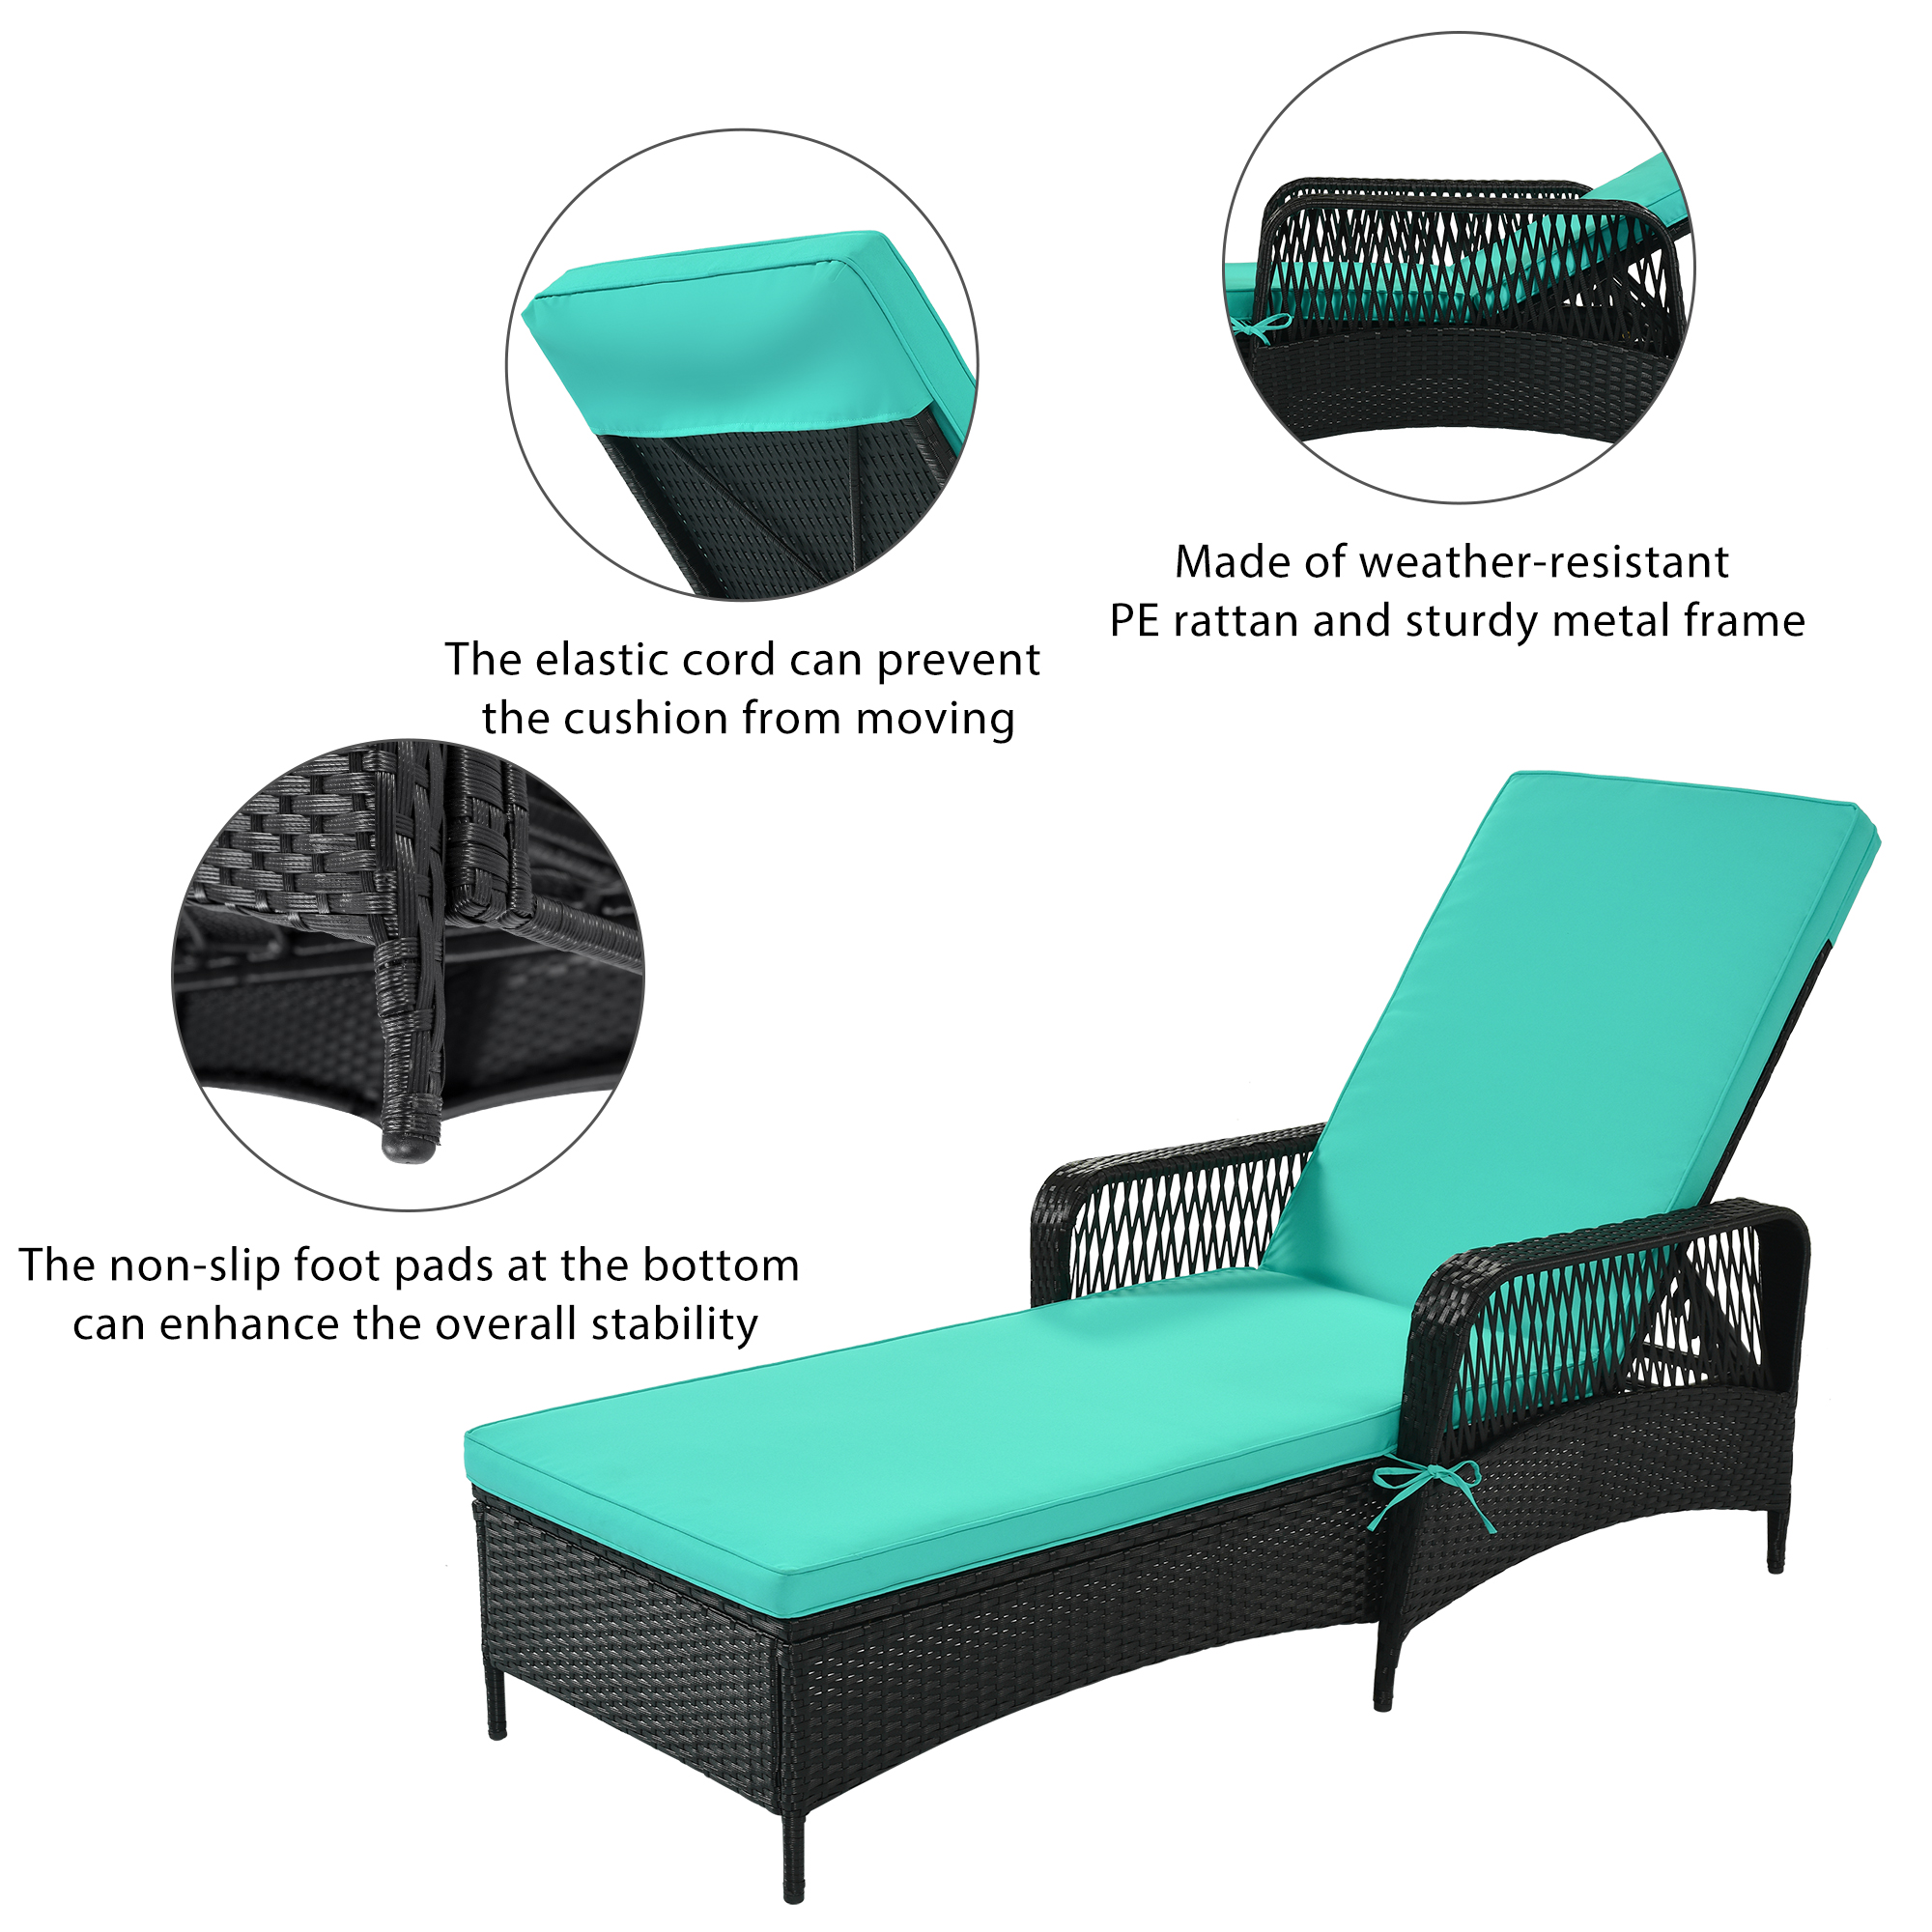 SYNGAR Patio Lounge Chair, Patio Chaise Lounges with Thickened Cushion, PE Rattan Steel Frame Pool Lounge Chair for Patio Backyard Porch Garden Poolside, Green - image 3 of 10